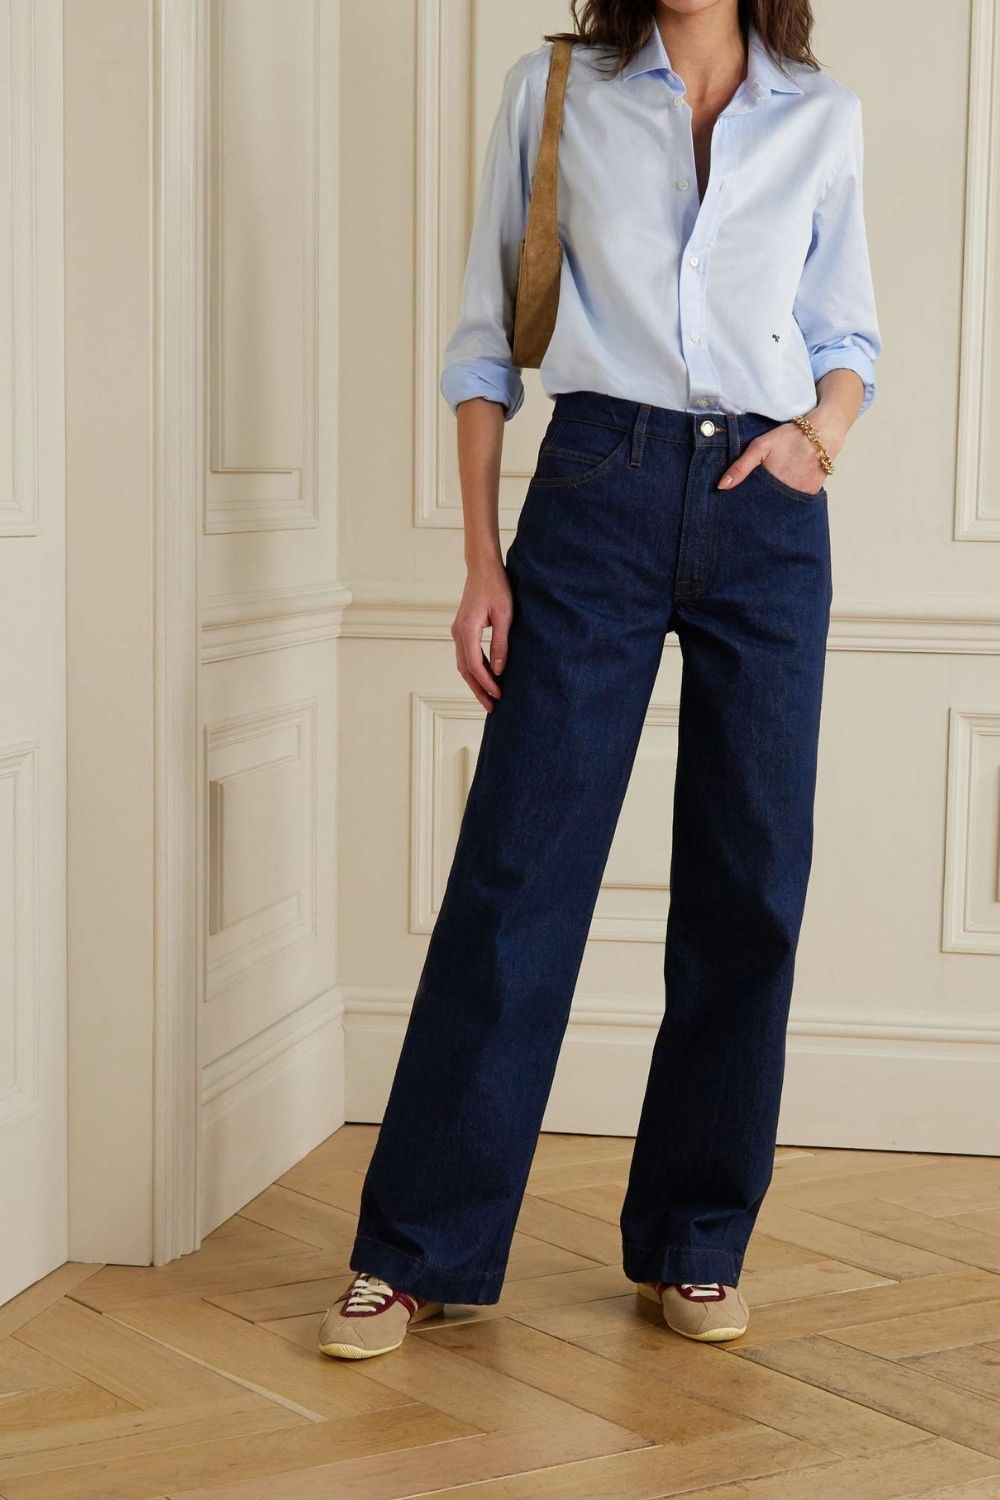 79 Kick Flare Jeans Outfit ideas  flare jeans outfit, kick flare jeans, kick  flare jeans outfit